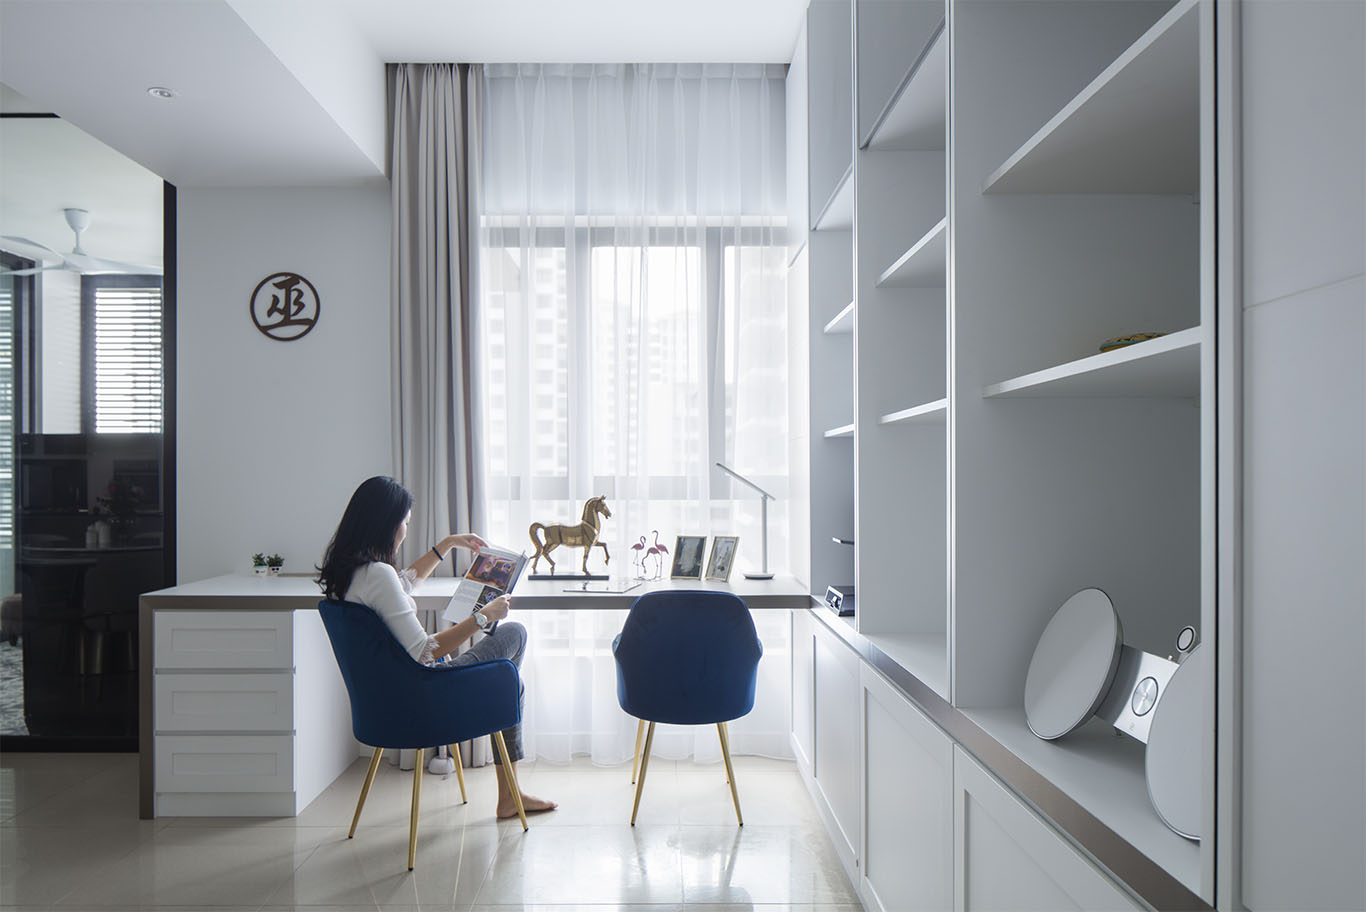 Minimalist white and blue theme study area with white cabinet and racks, white study table and bold blue color chair, gold statue structure, and hidden curtain